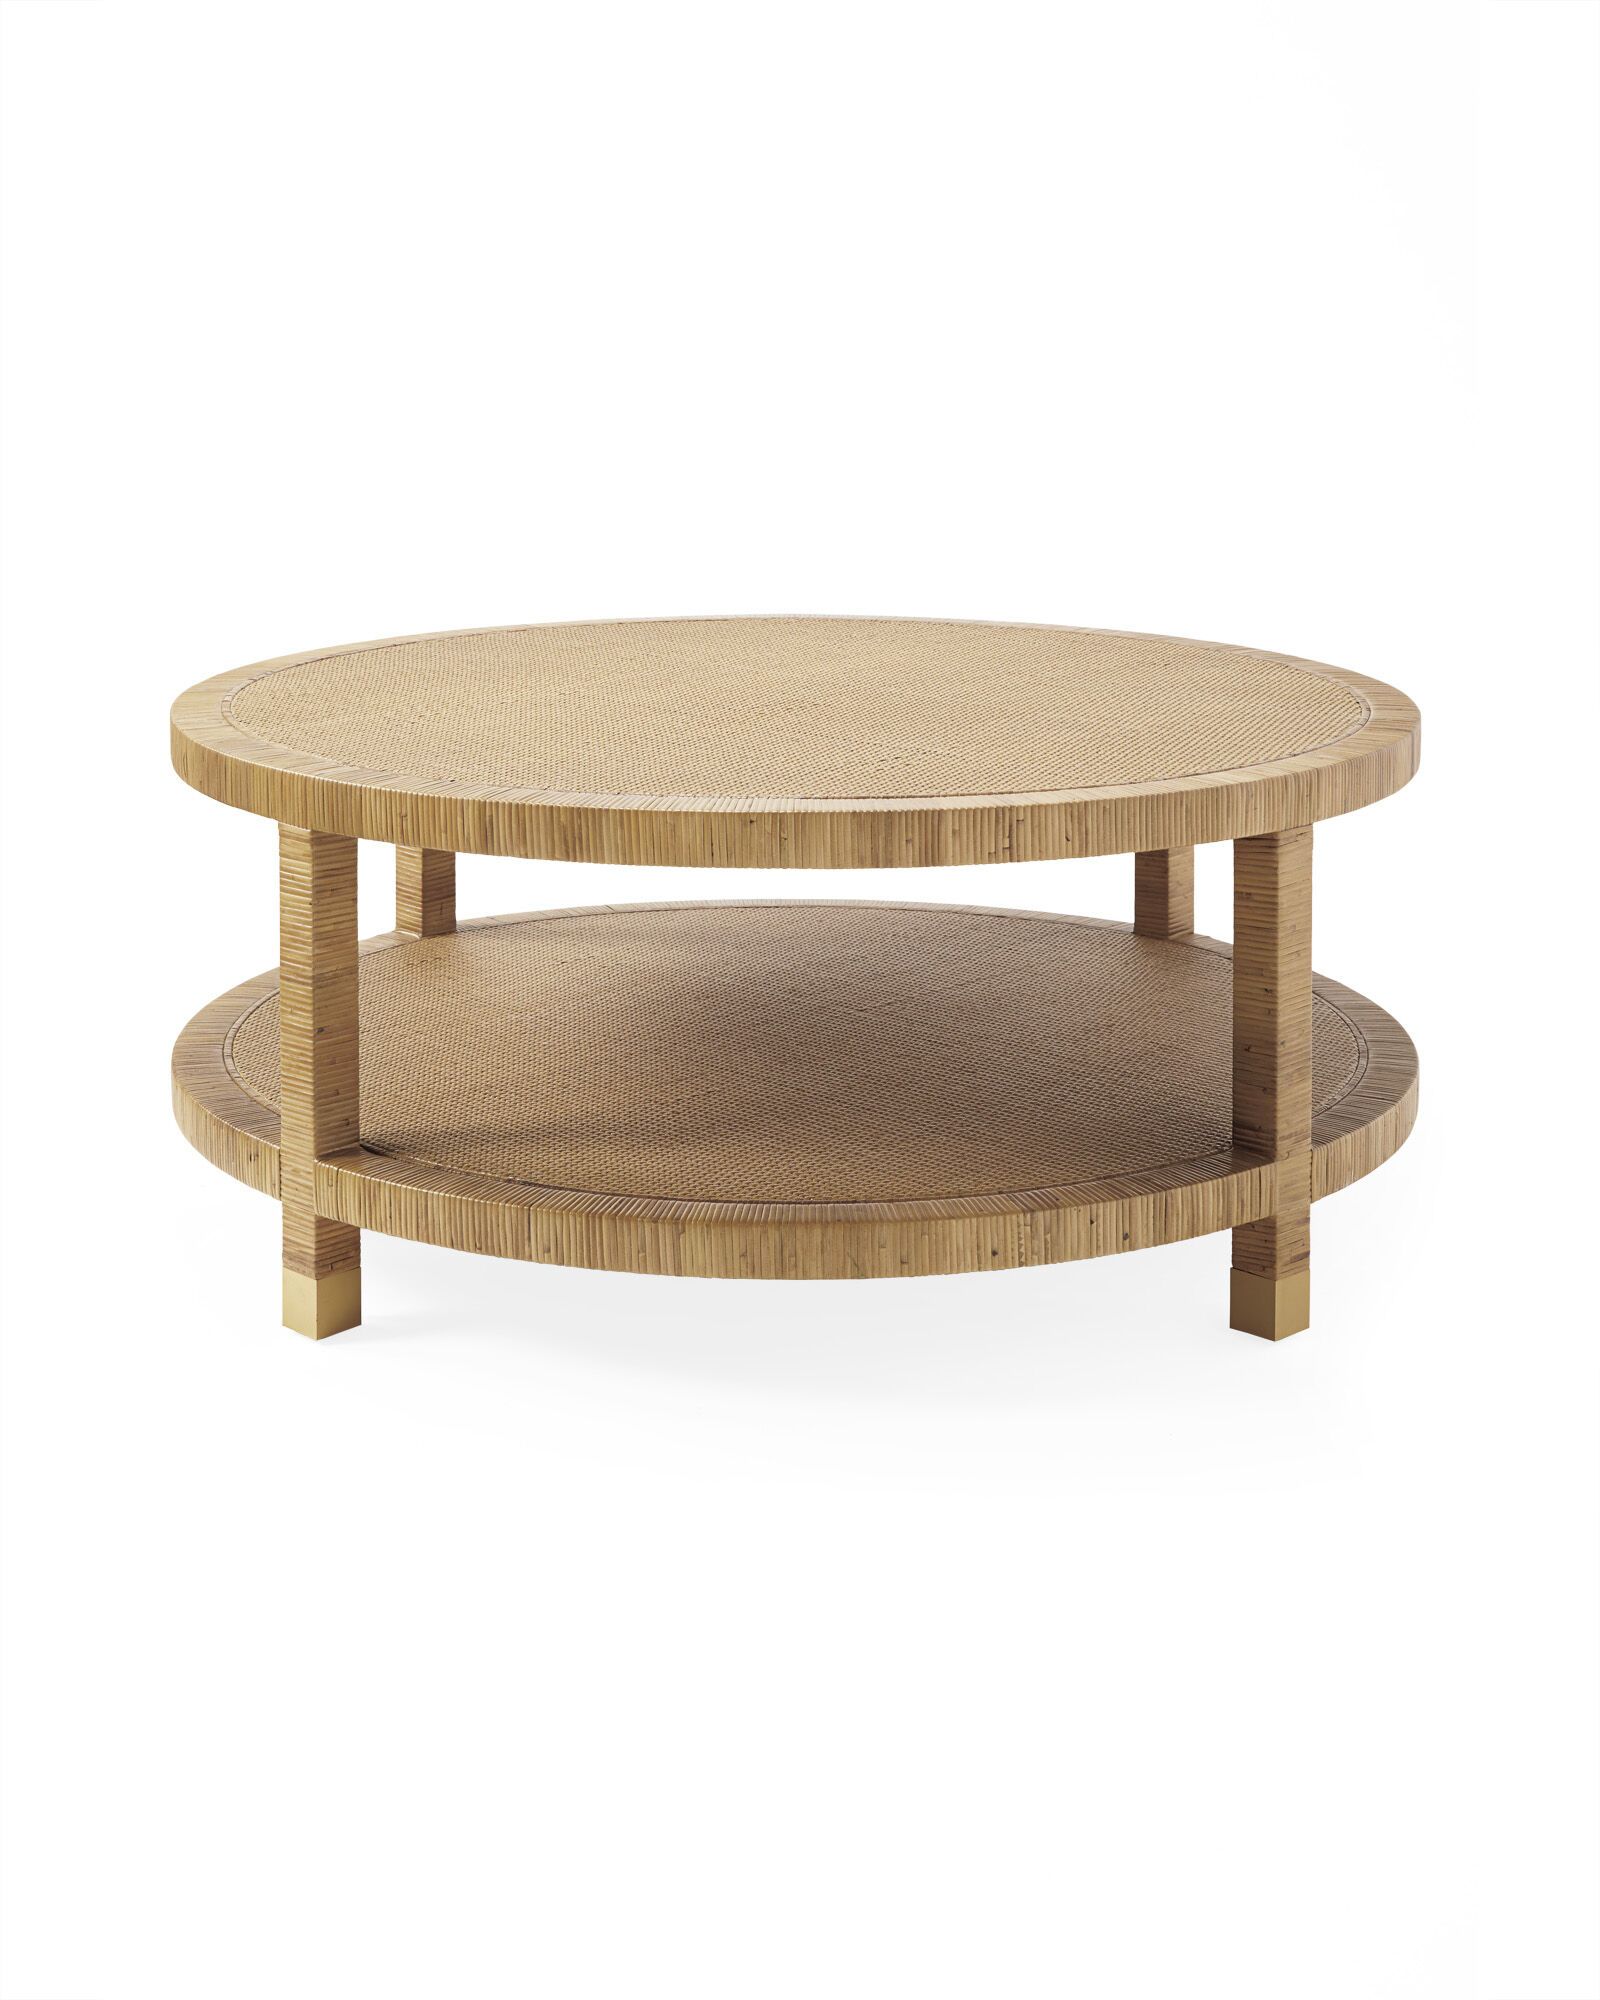 Balboa Coffee Table | Serena and Lily